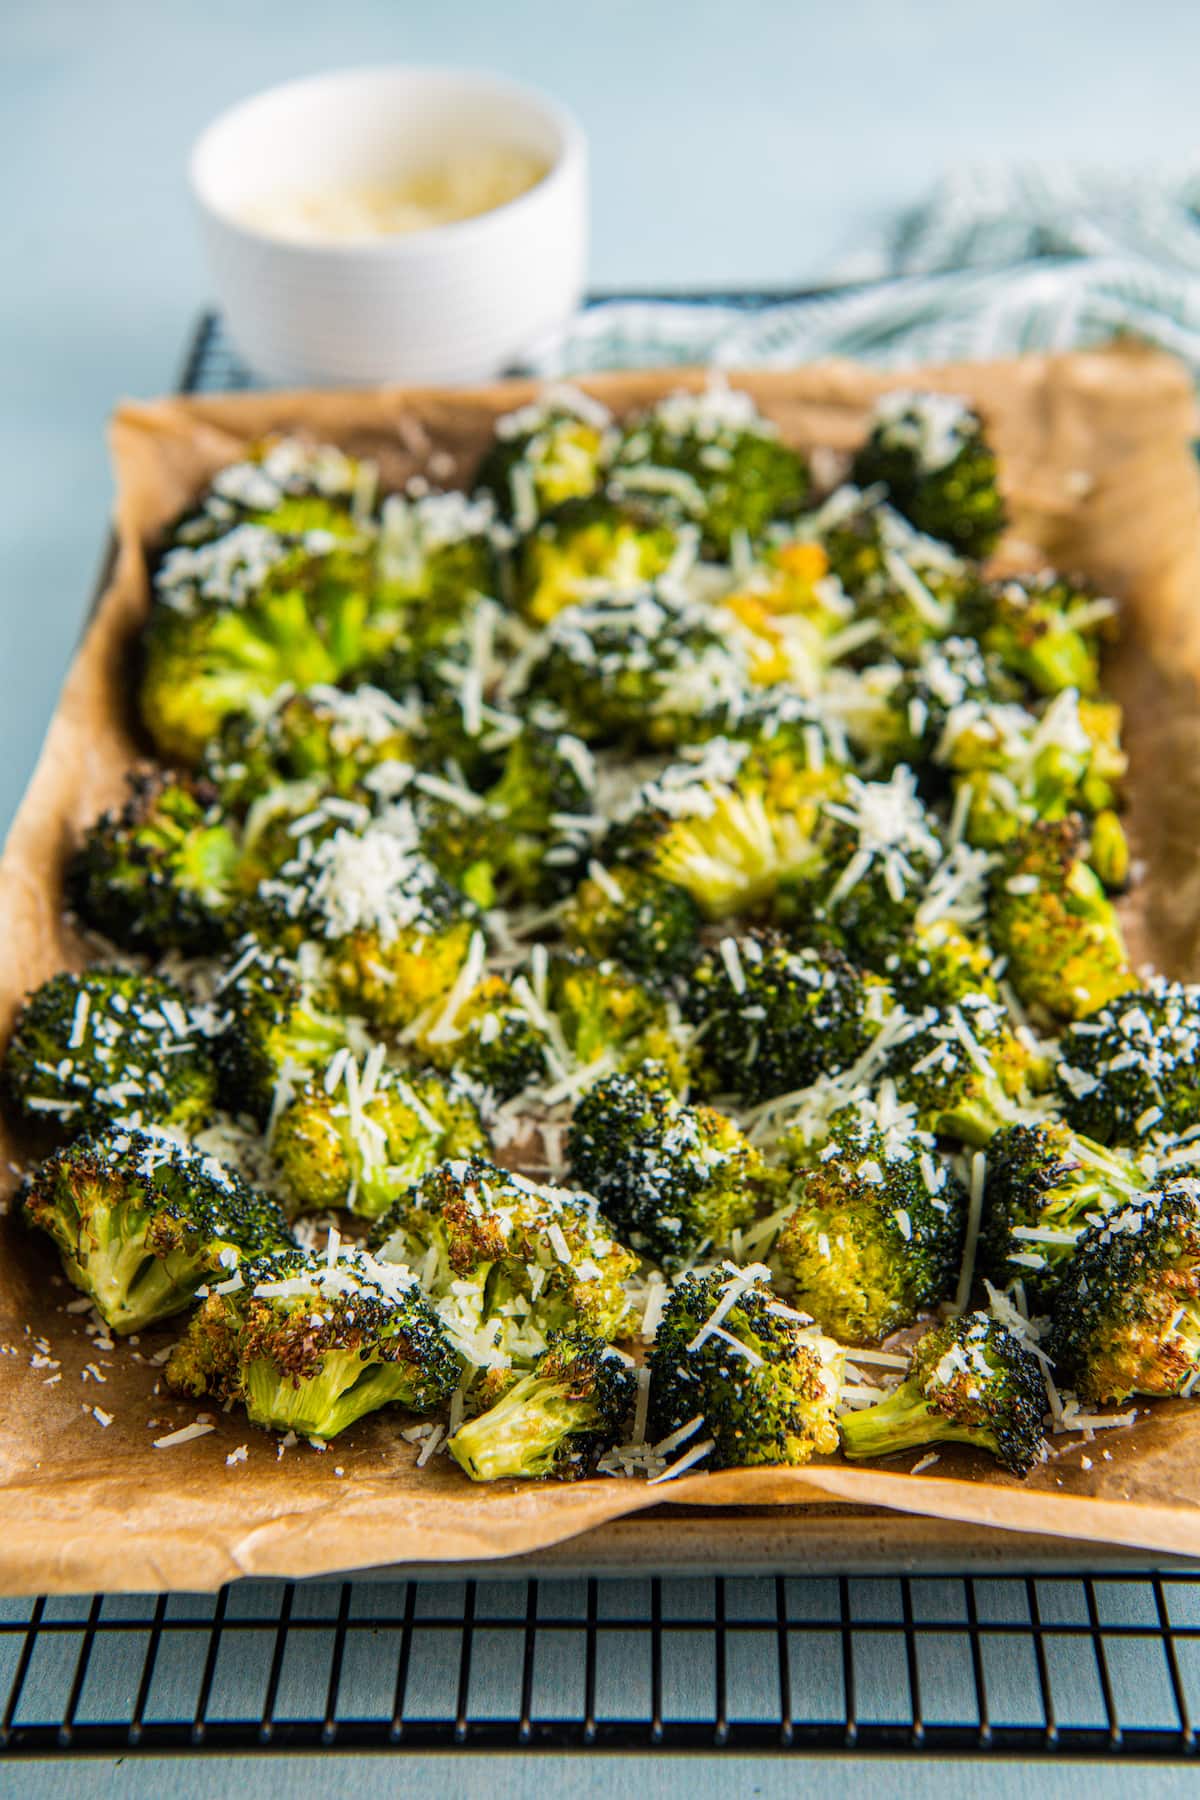 Parmesan cheese tops roasted broccoli.